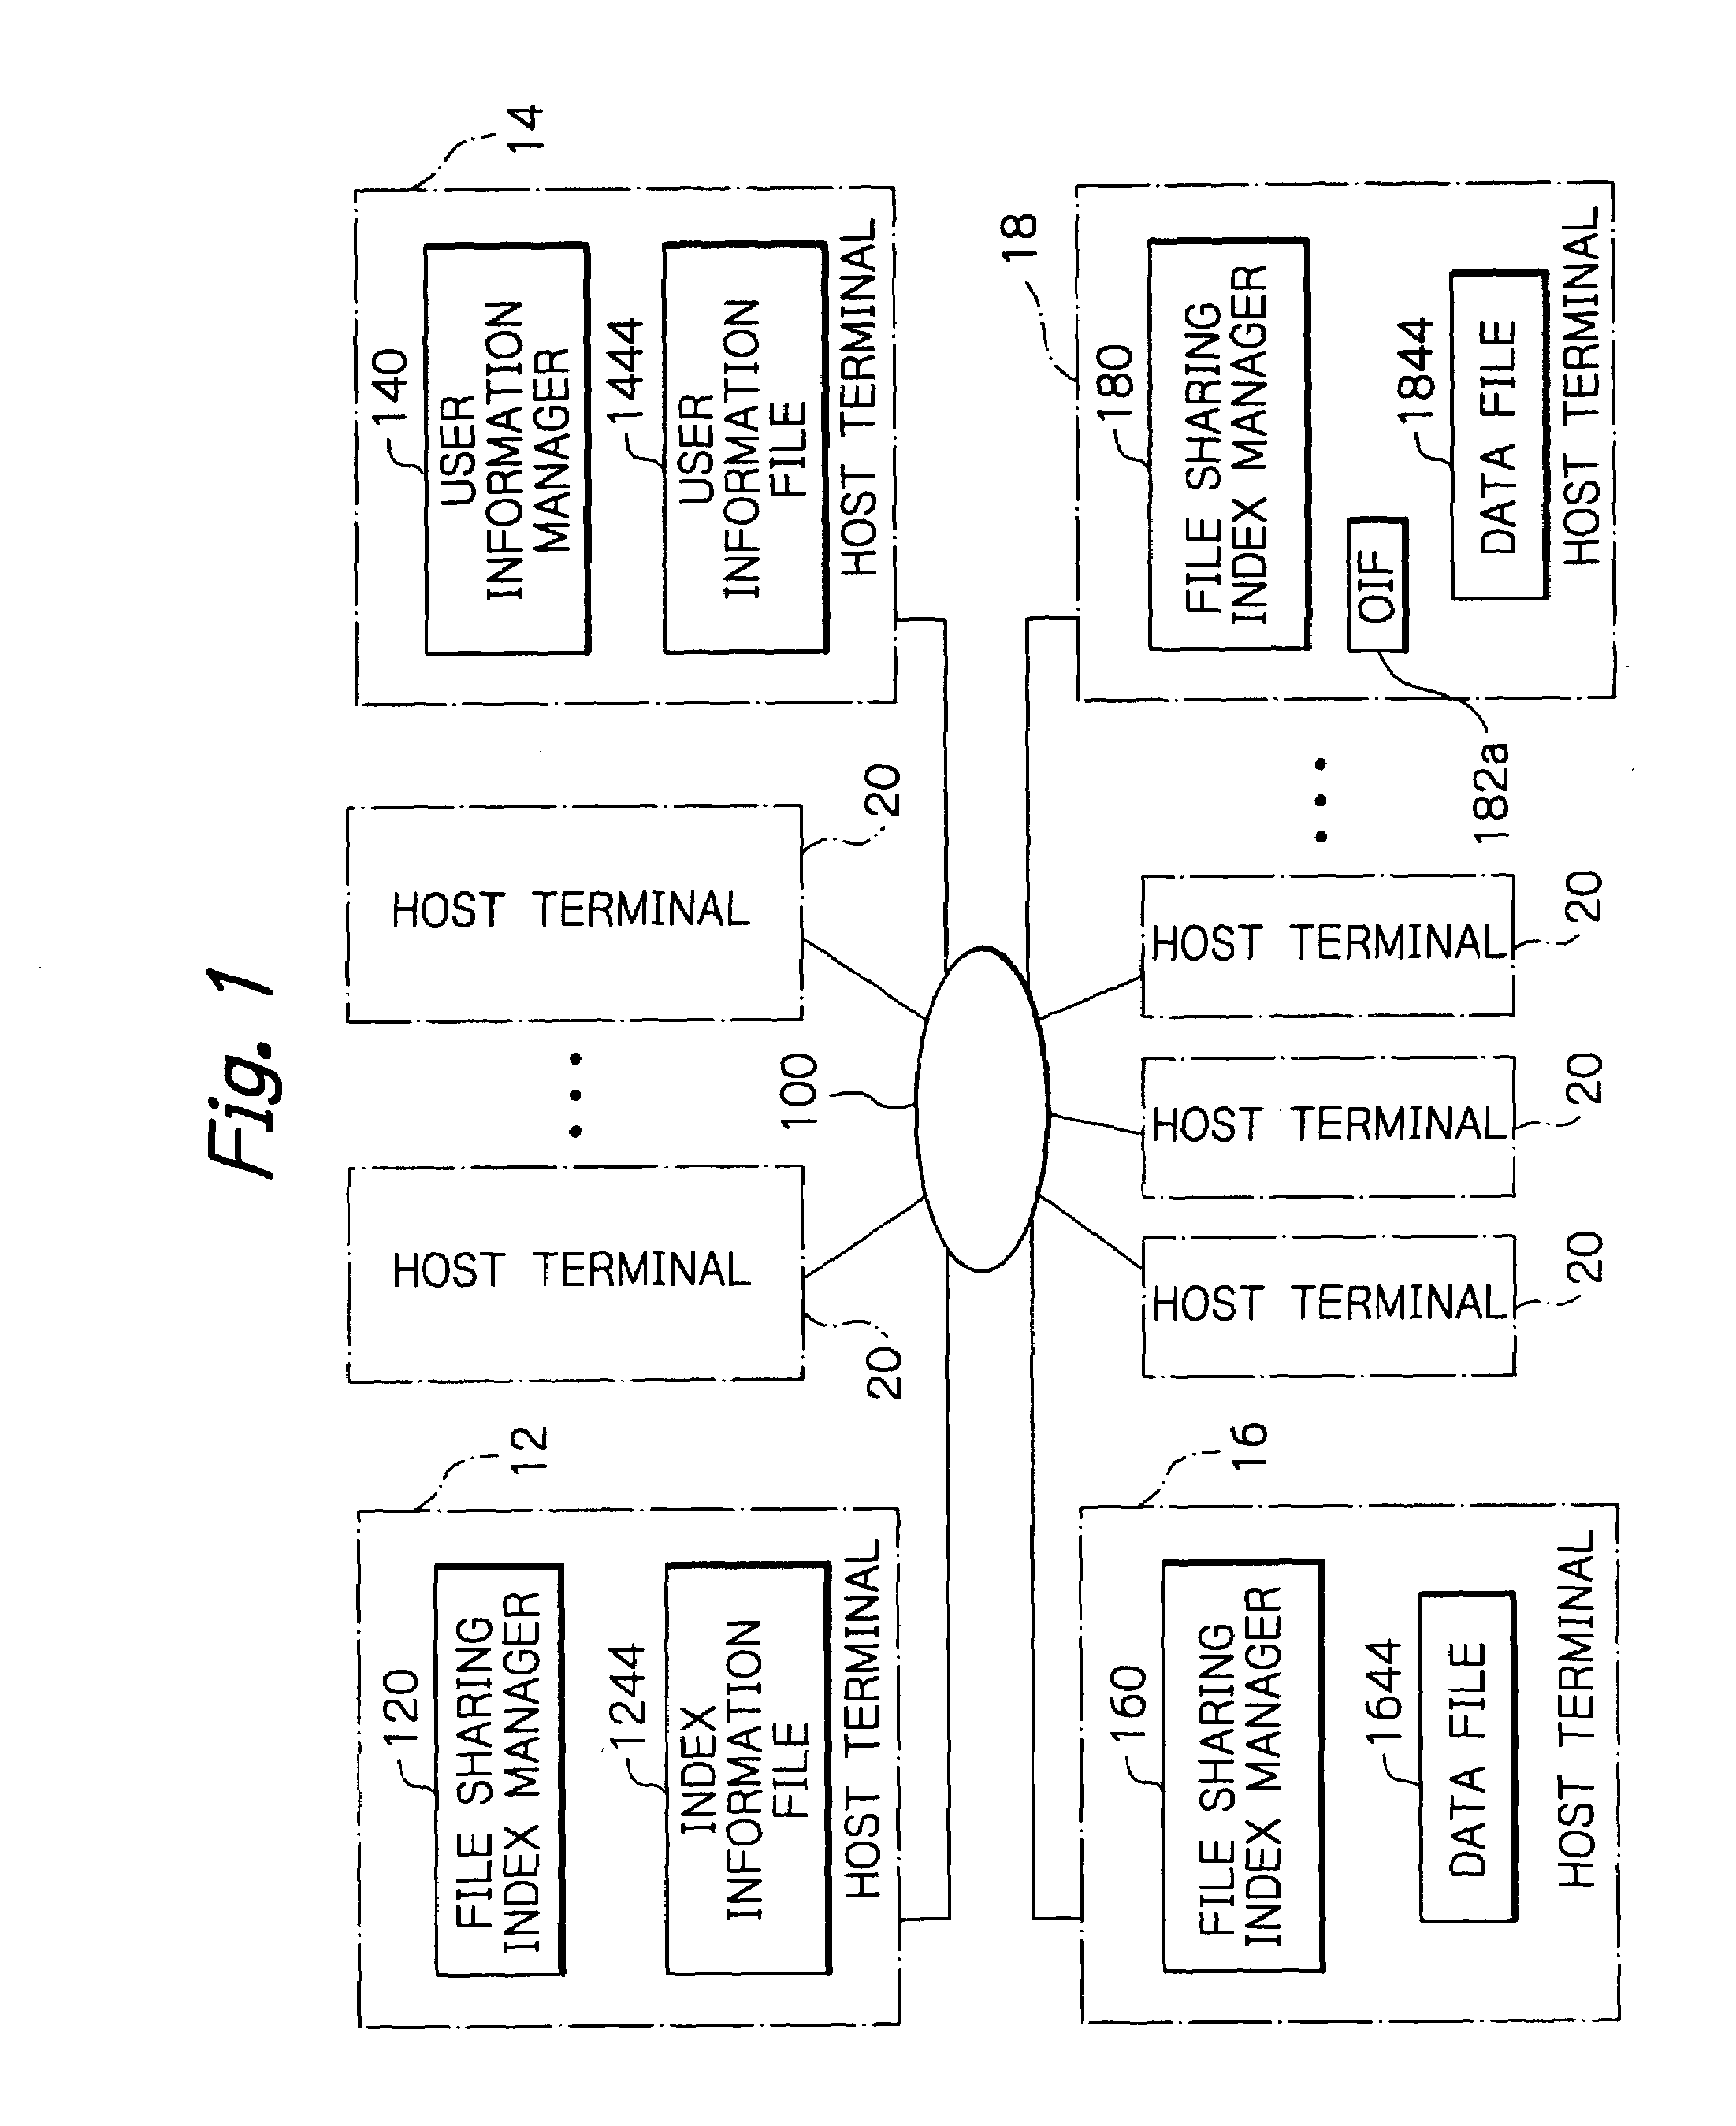 Distributed file sharing system and a file access control method of efficiently searching for access rights